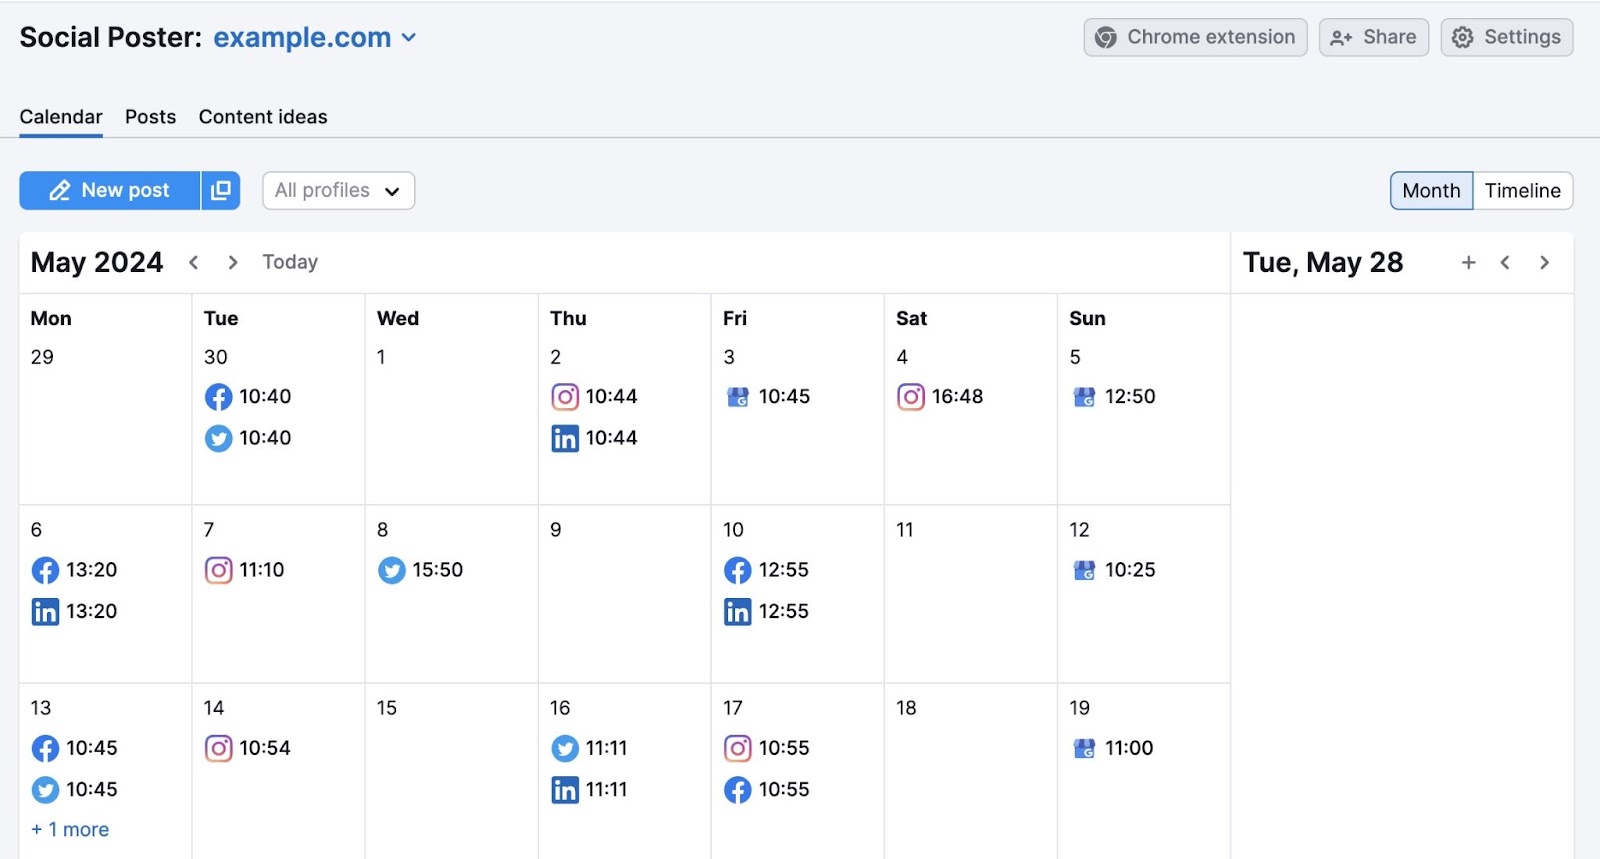 Calendar view on Social Poster with posts scheduled across different social media platforms.